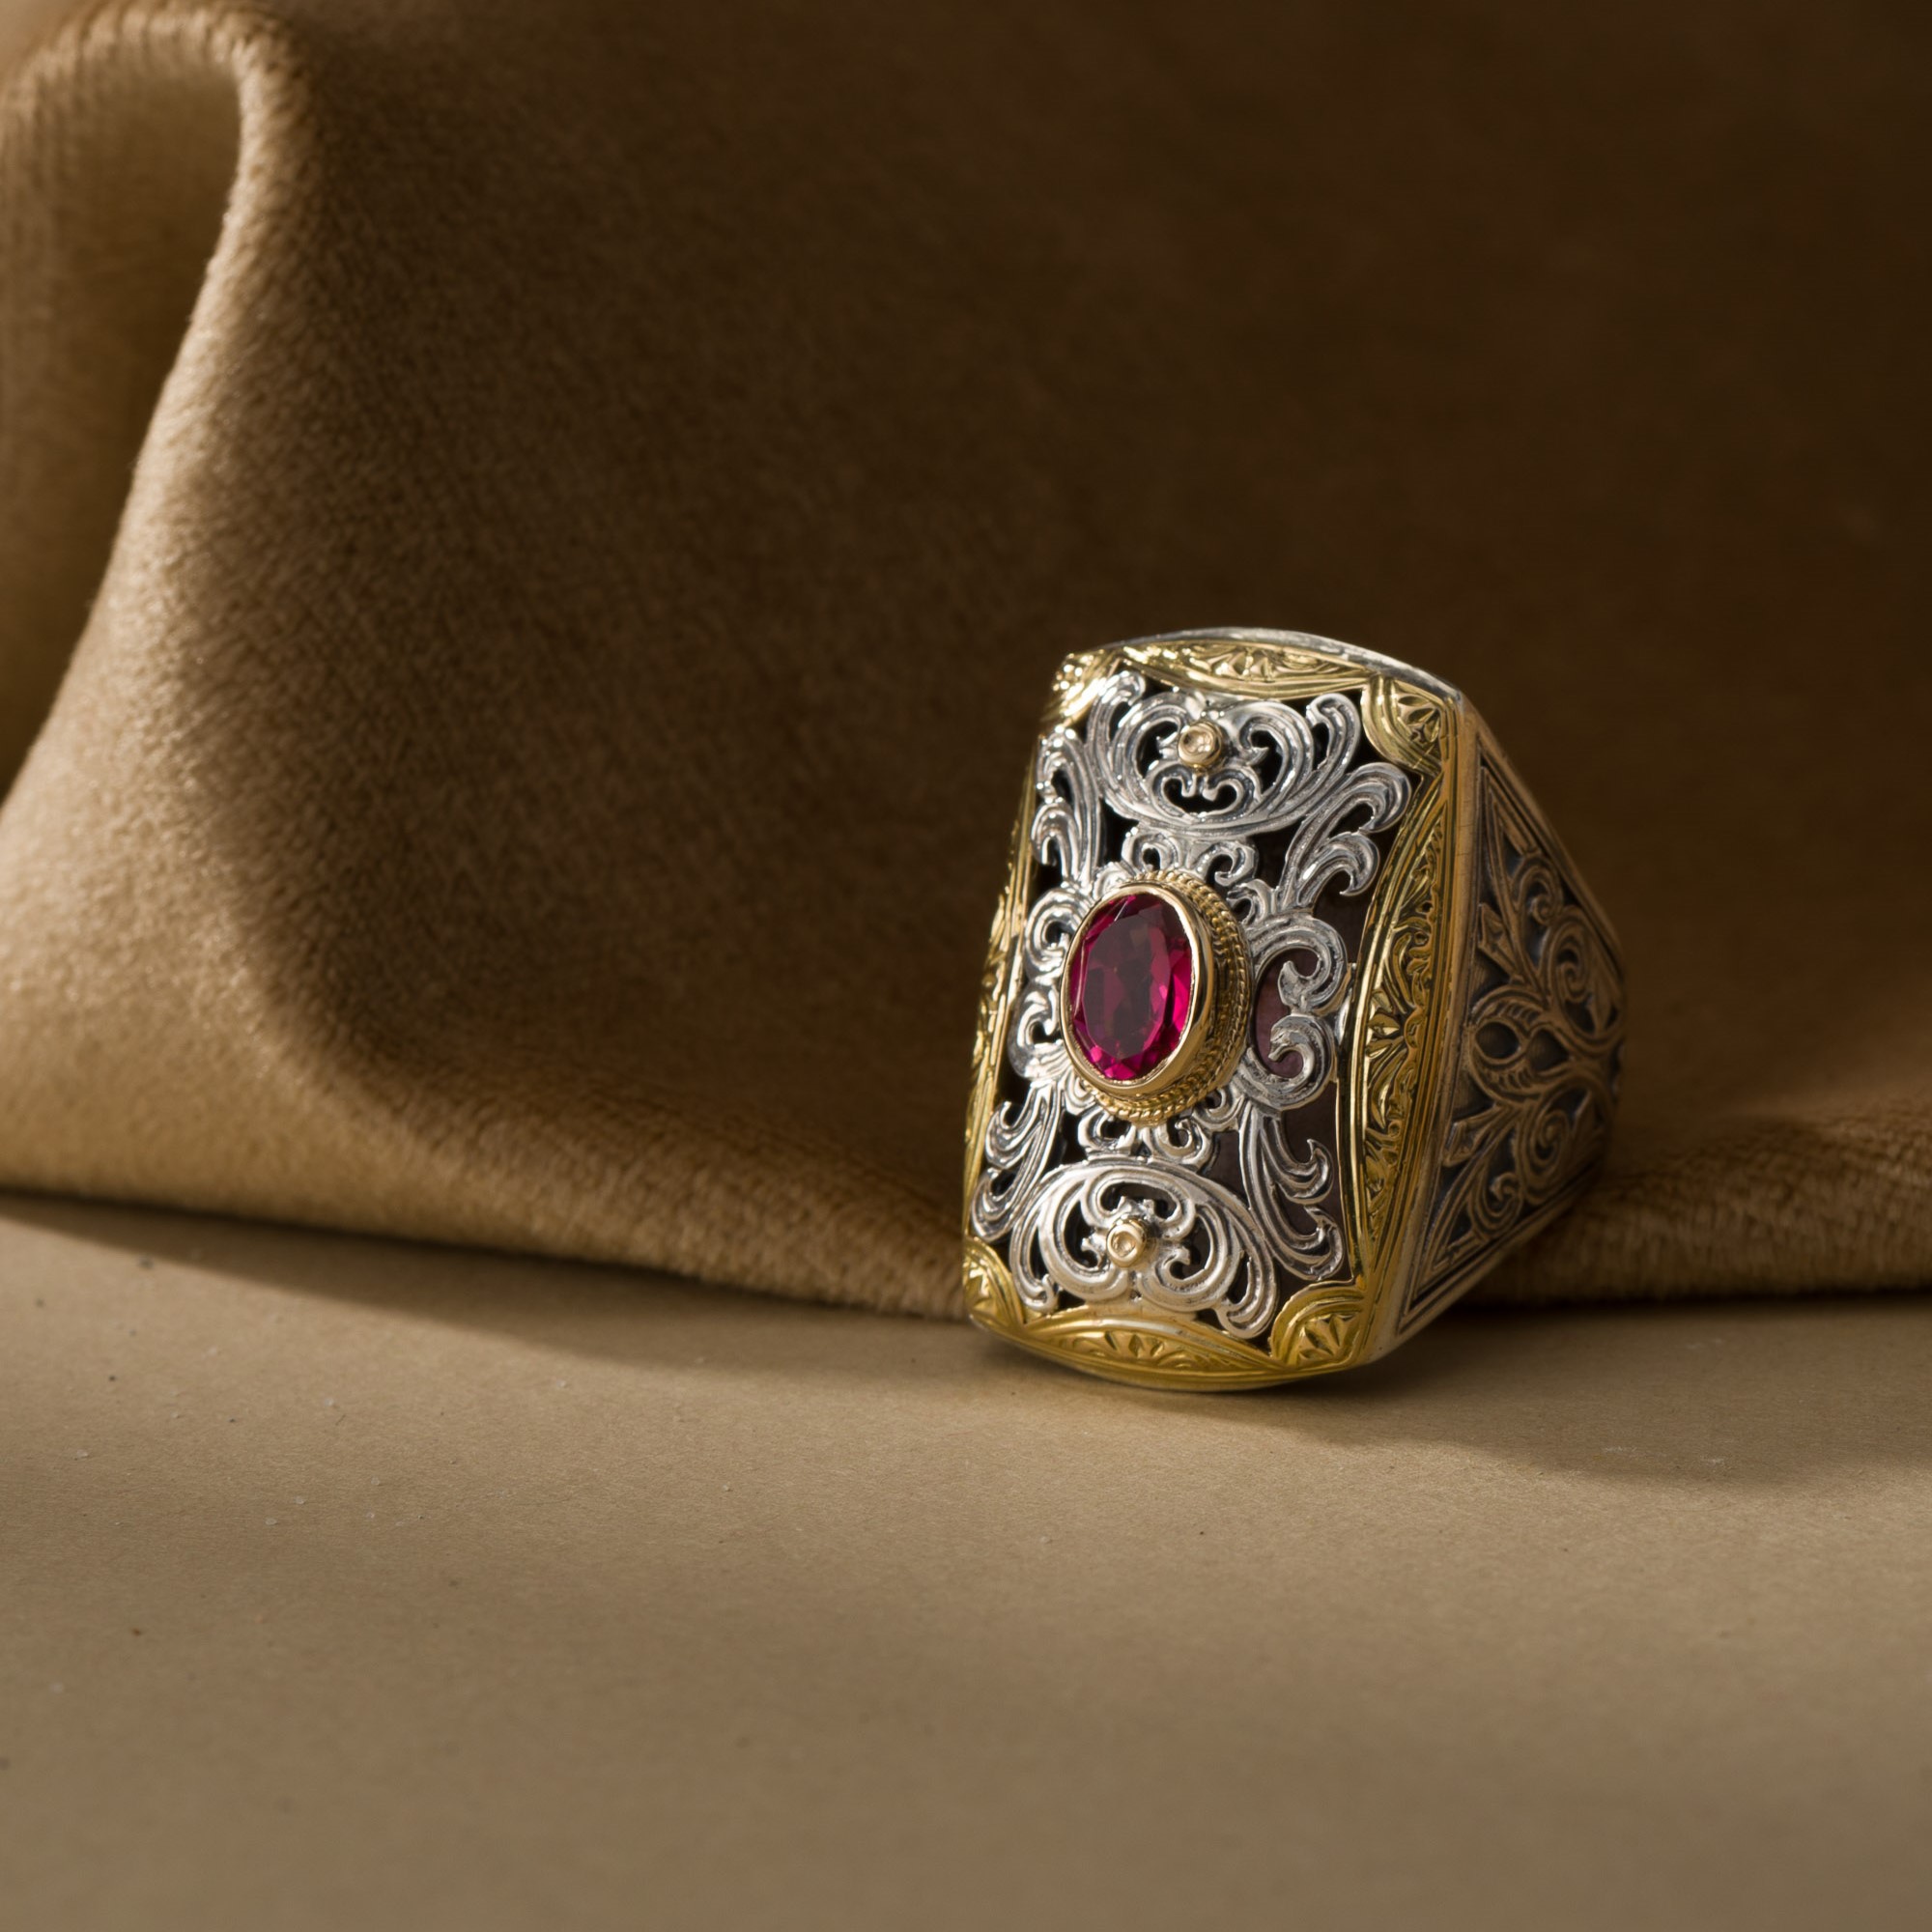 Garden shadows ring in 18K Gold and Sterling Silver with pink topaz